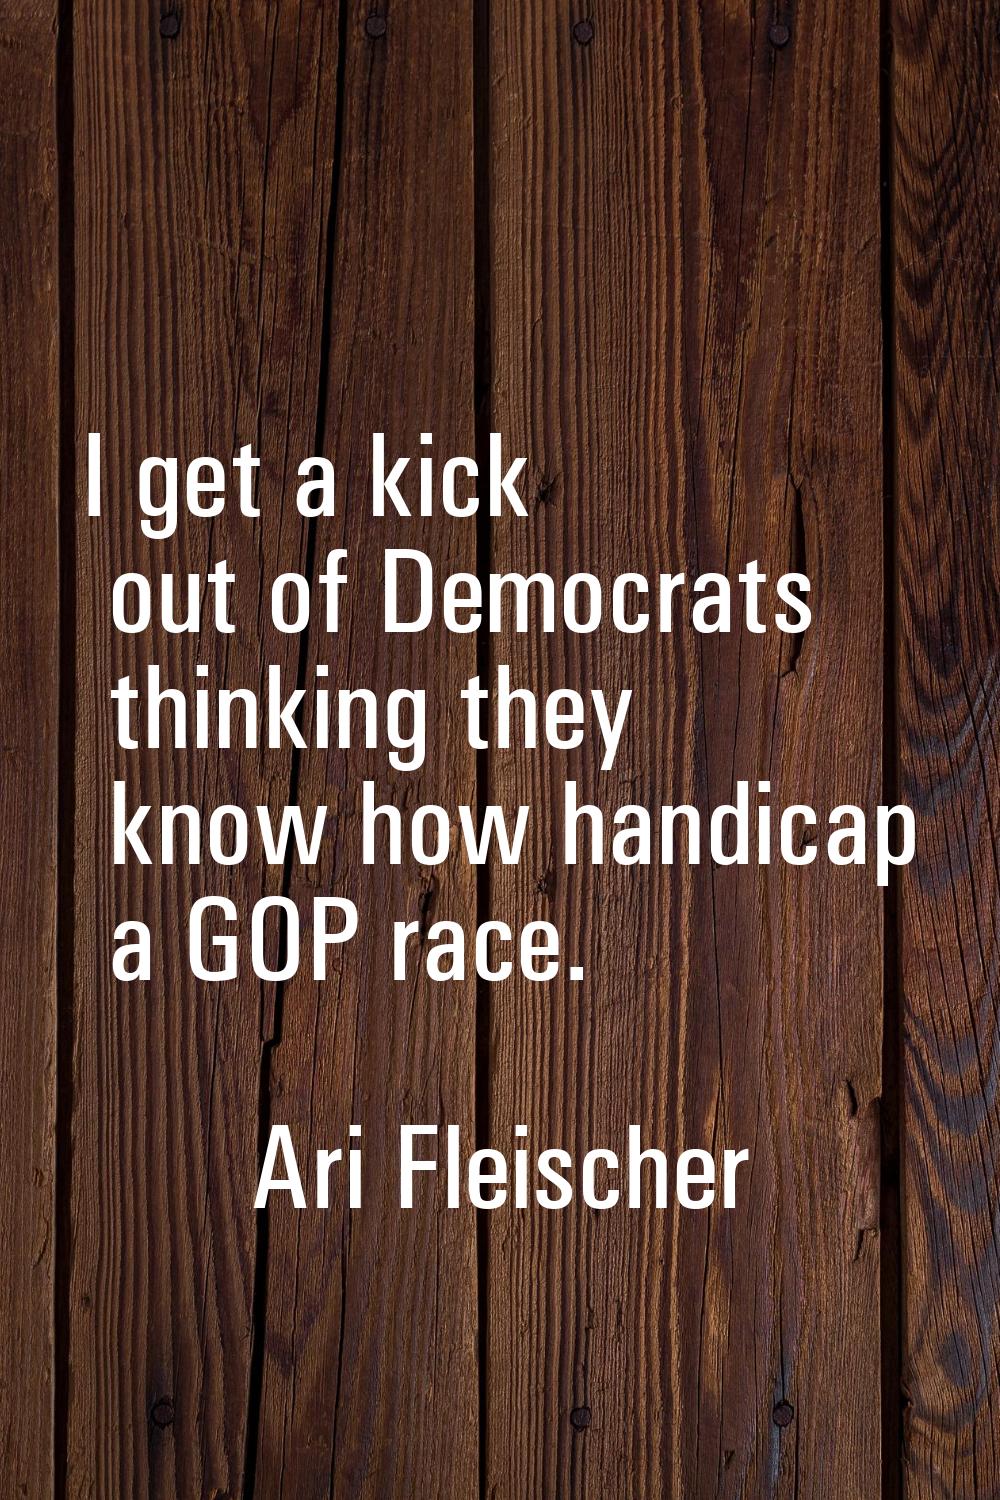 I get a kick out of Democrats thinking they know how handicap a GOP race.